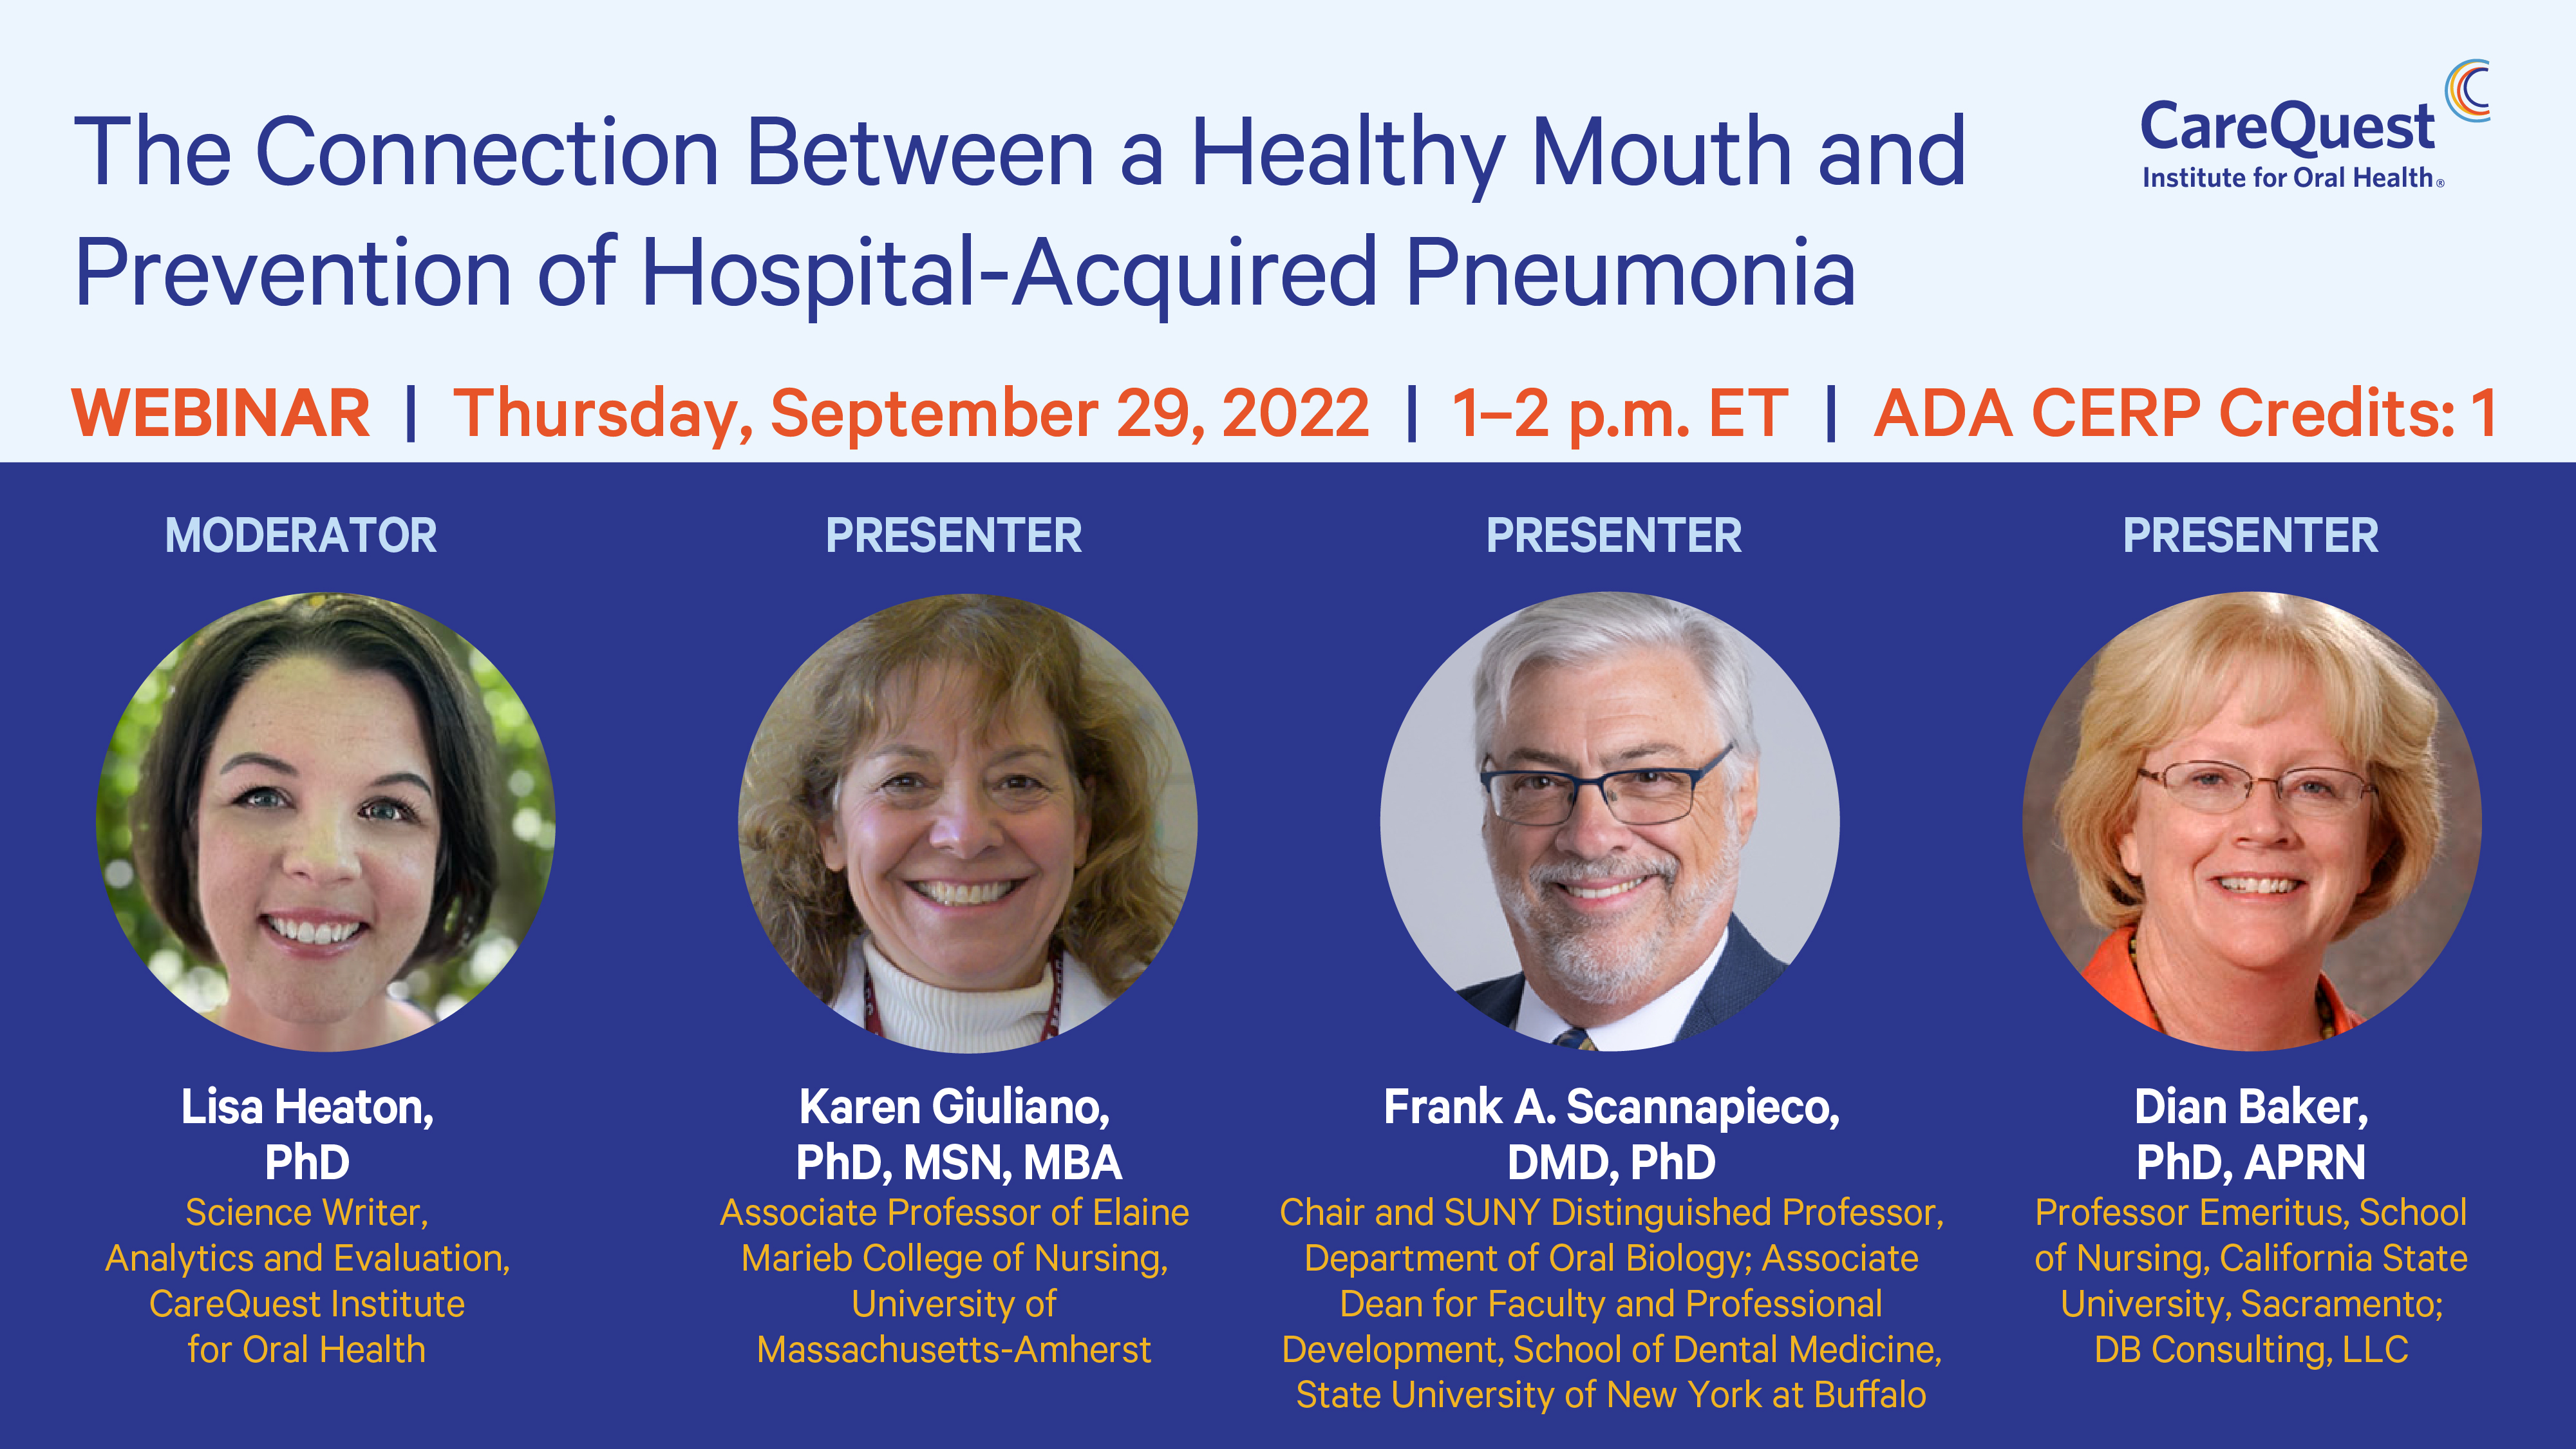 The Connection Between a Healthy Mouth and Prevention of Hospital-Acquired Pneumonia 